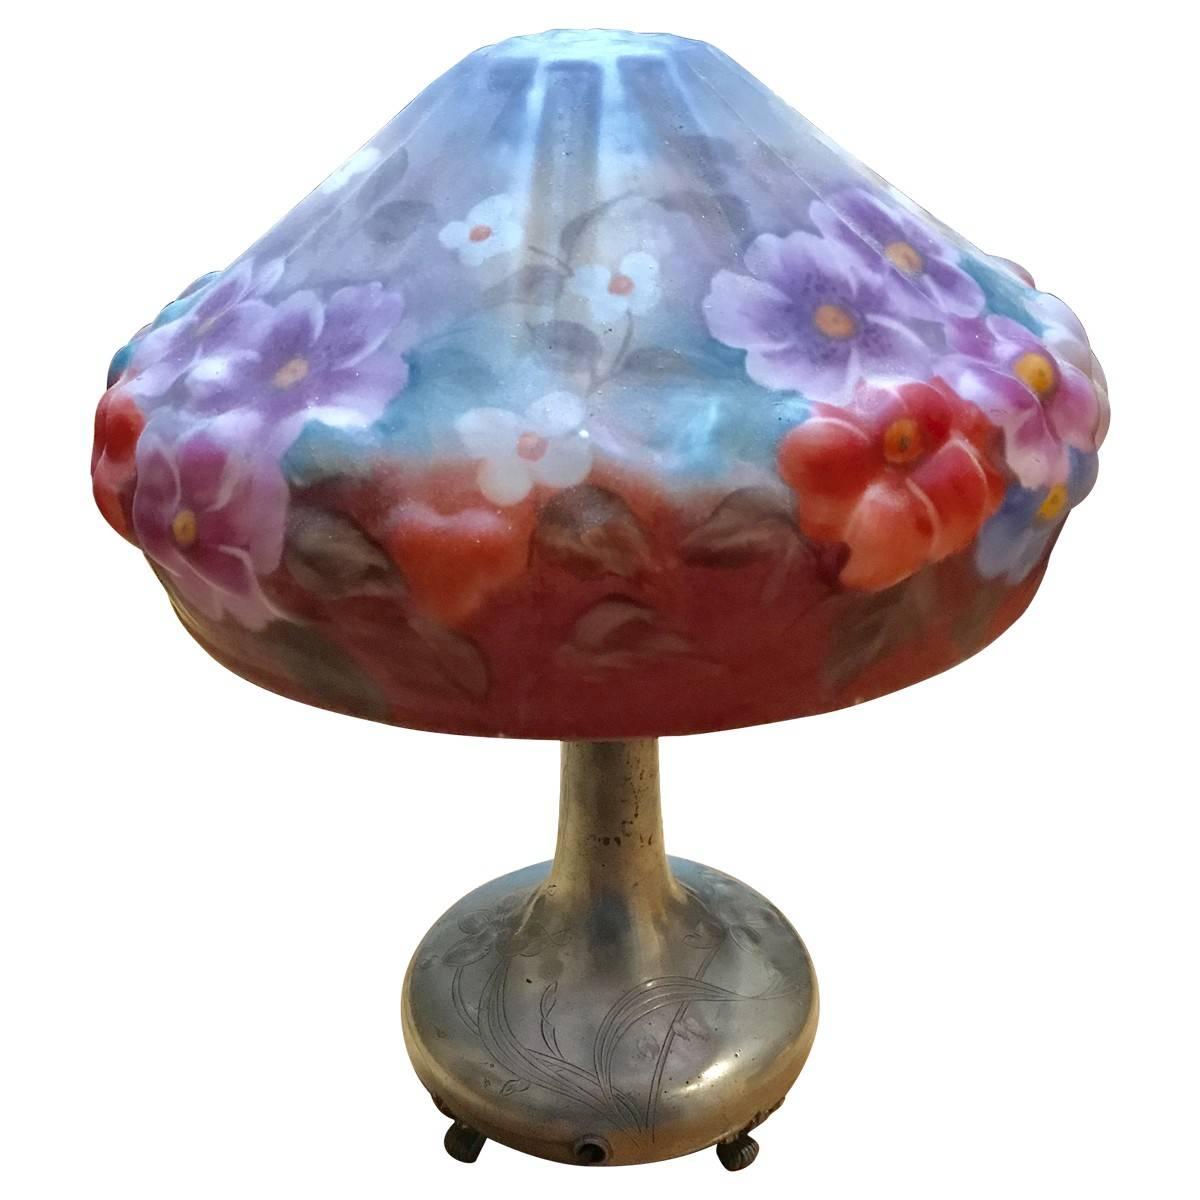 Pairpoint Manufacturing Company was founded by Thomas J. Pairpoint in 1880 in New Bedford, Massachusetts. Whimsical and one-of-a-kind, this Art Nouveau-style lamp is composed of a silver plated Stand and a frosted glass shade. Claw feet and colorful